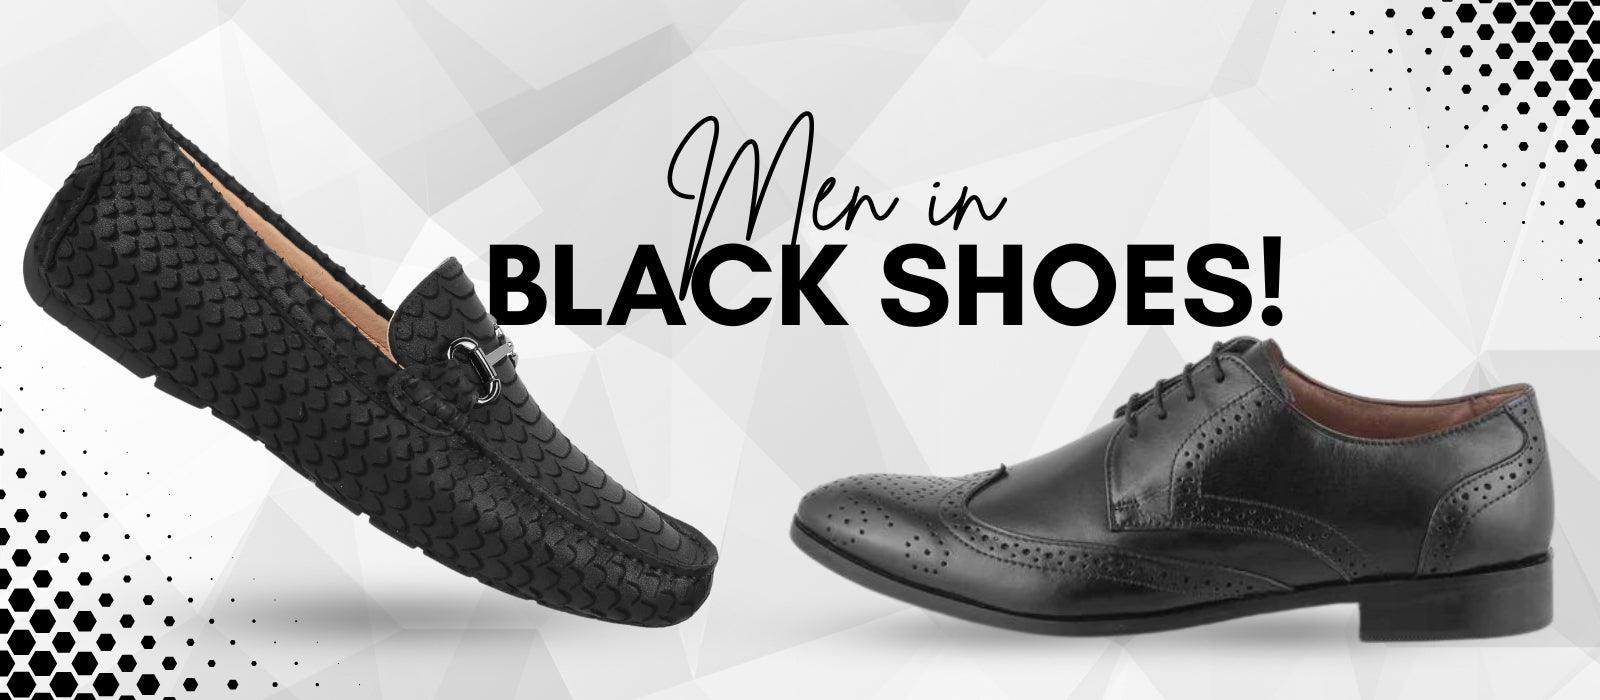 How to wear black shoes – A guide for men